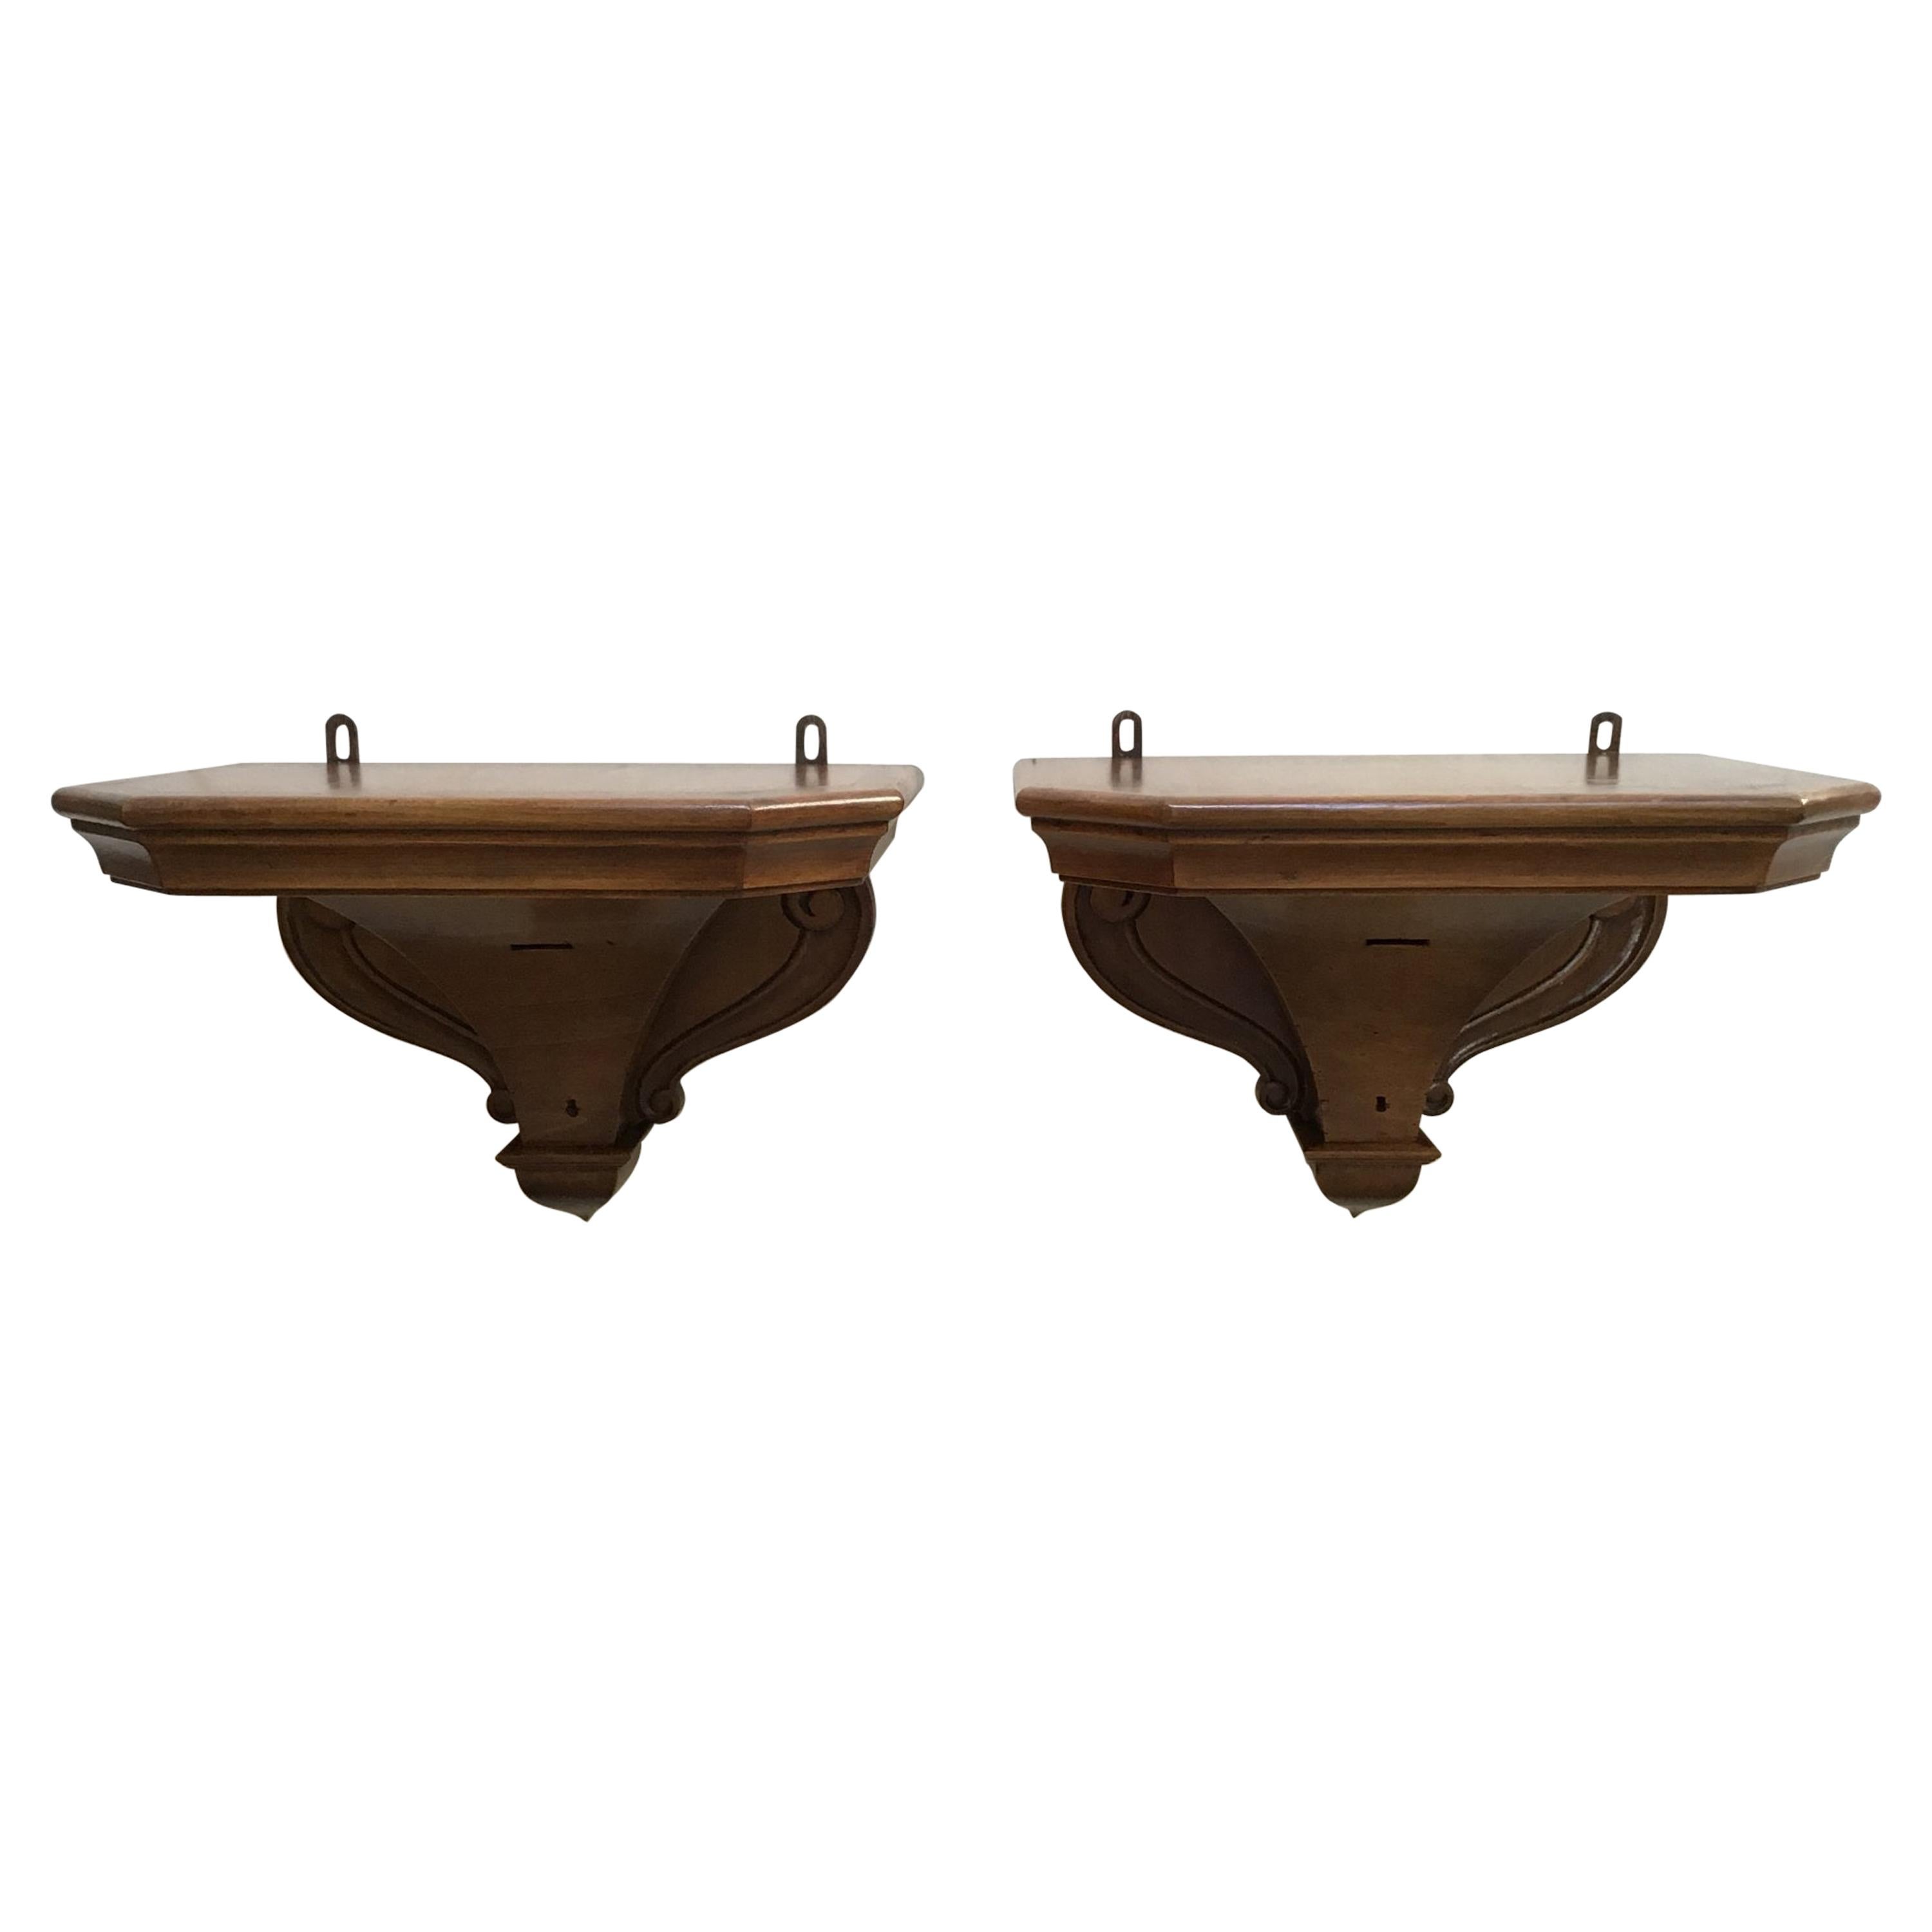 19th Century Italian Pair of Wall Shelves in Patinated Wood, 1890s For Sale